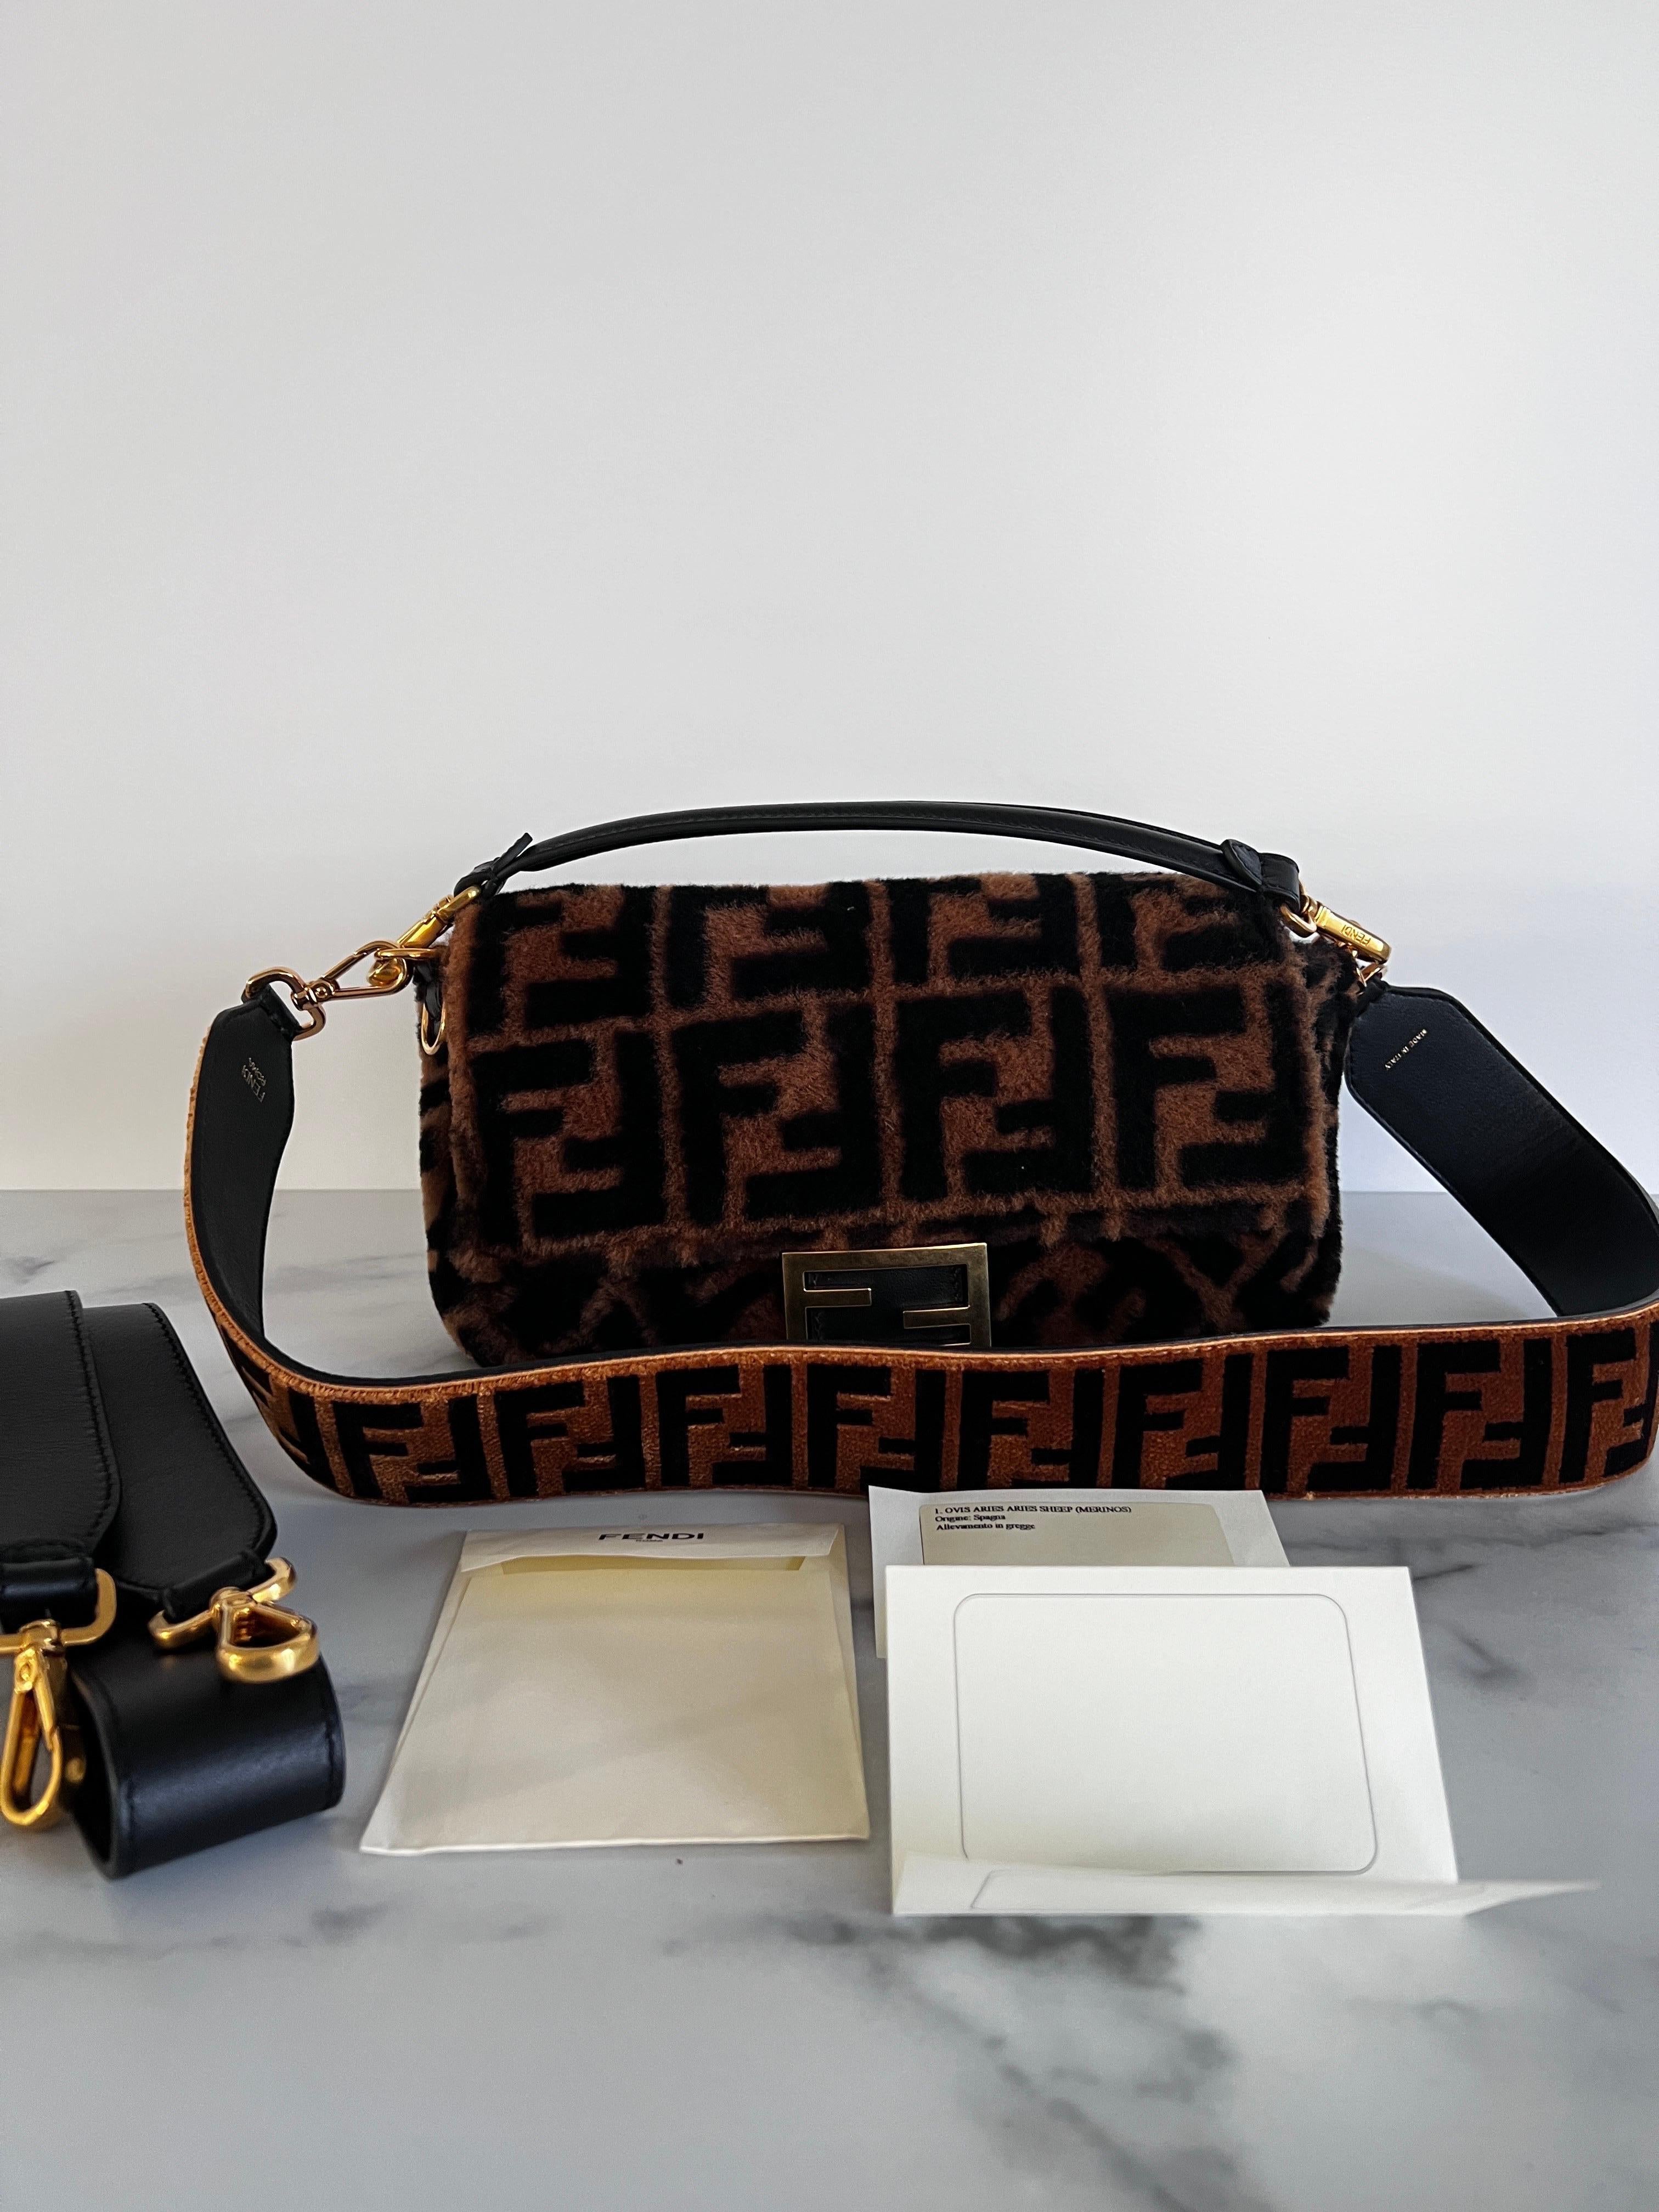 FENDI 2020 Brown Shearling Double F Baguette with Brown Velvet Double F Long Strap
DESCRIPTION
Fendi Shoulder Bag
From the 2020 Collection
Brown Shearling
Double F print
Gold-Tone Hardware
Leather Trim
Flat Handle & Single Shoulder Strap
Leather